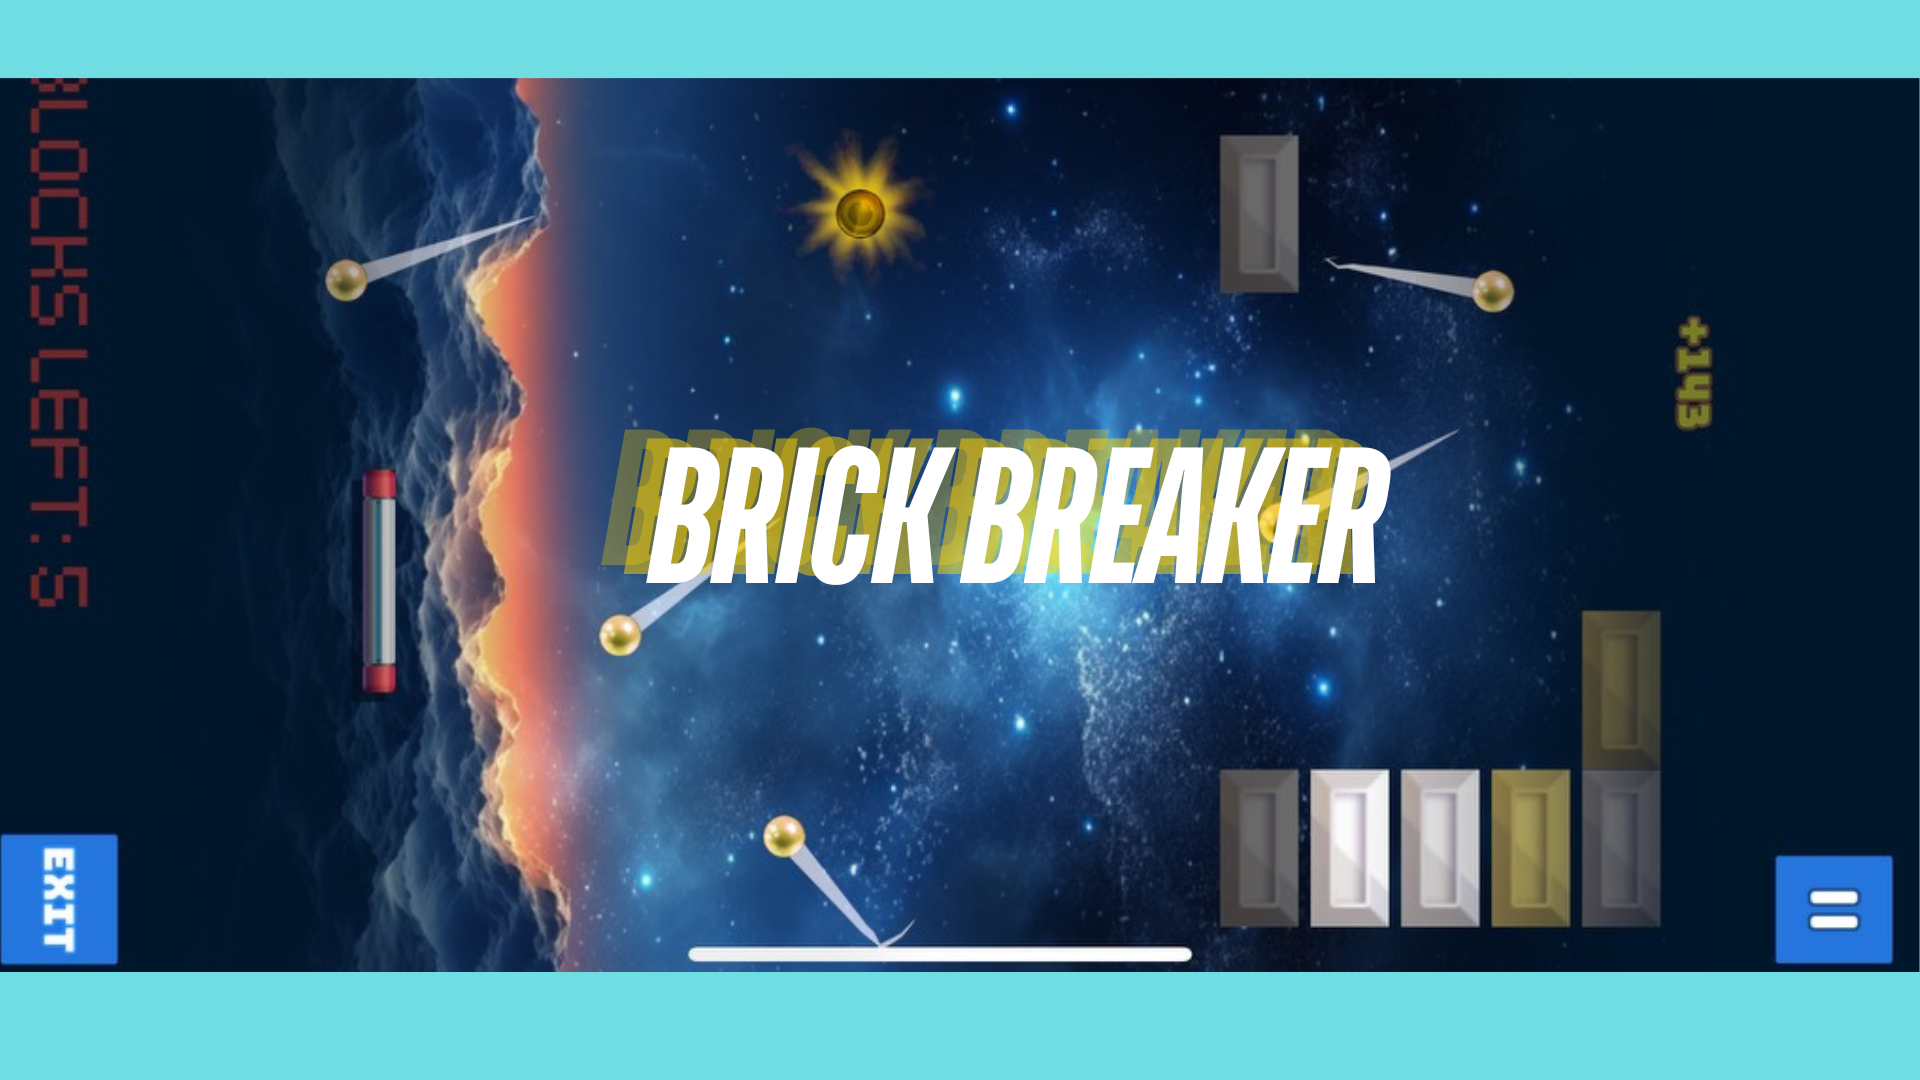 MOVAO Mini Exergaming includes the game Brick Breaker.  Challenge yourself while achieving your goals.  A laser sensor detects the leg movement and syncs to our MOVAO Play App. 